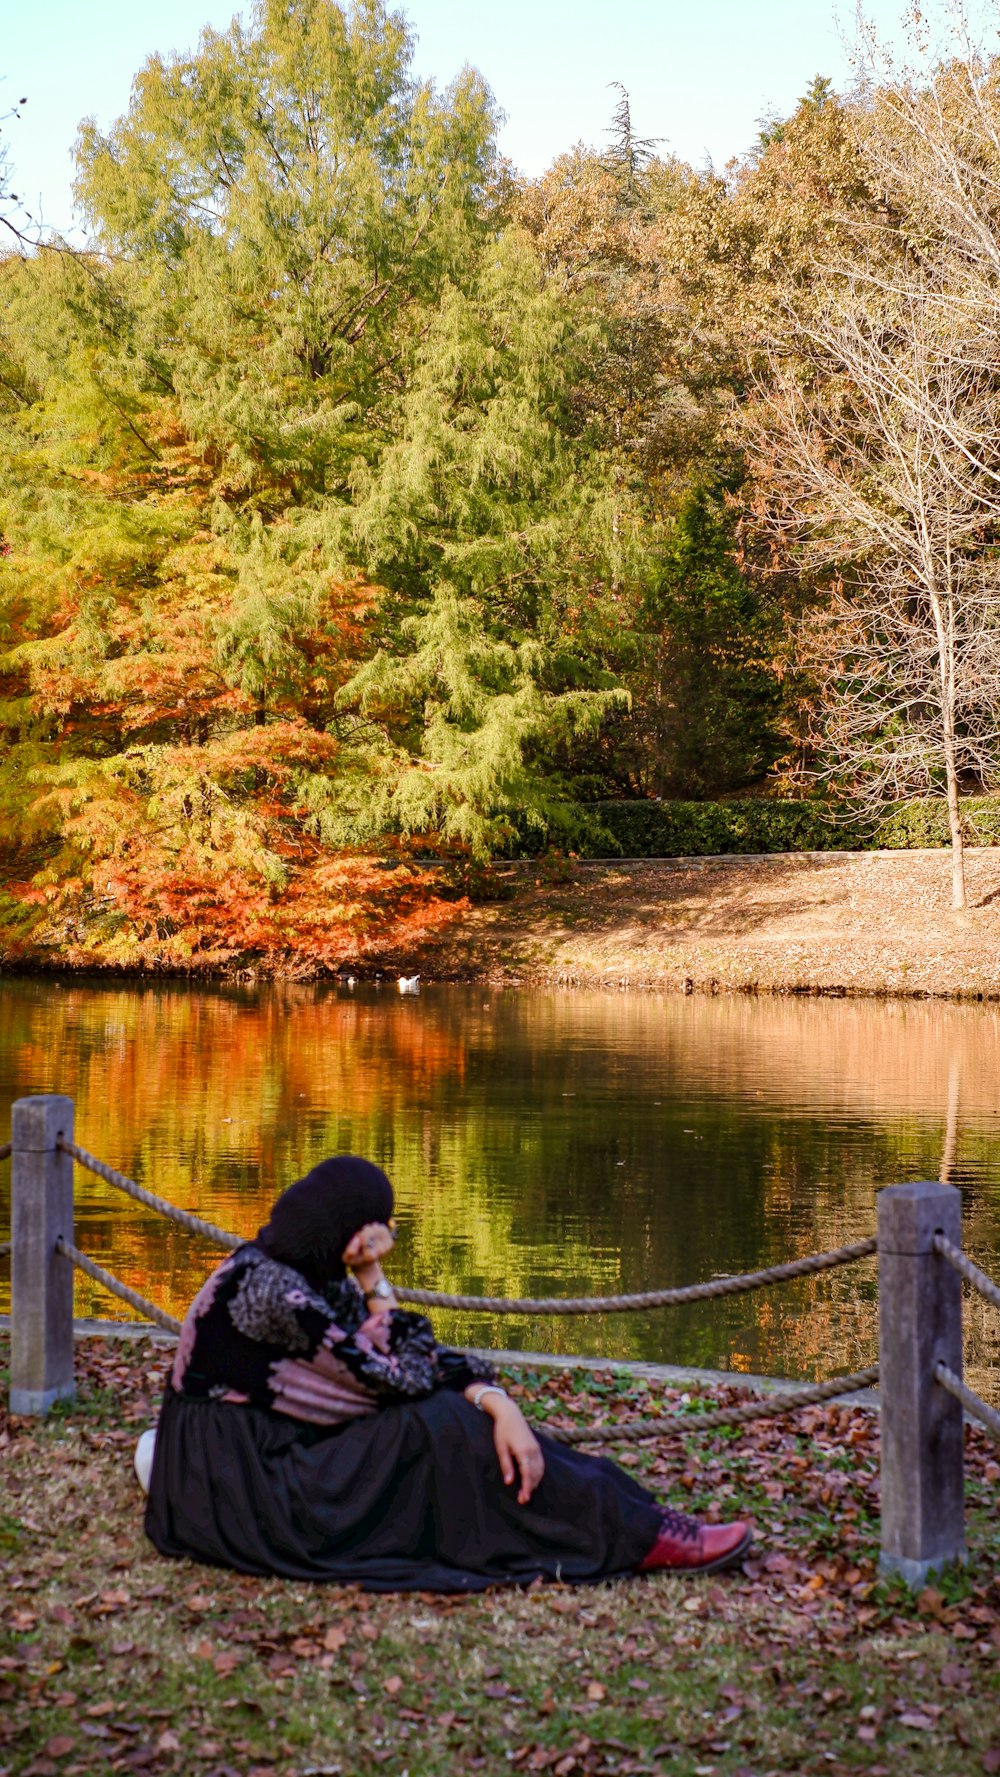 a person sitting on a blanket by a lake with trees in the background